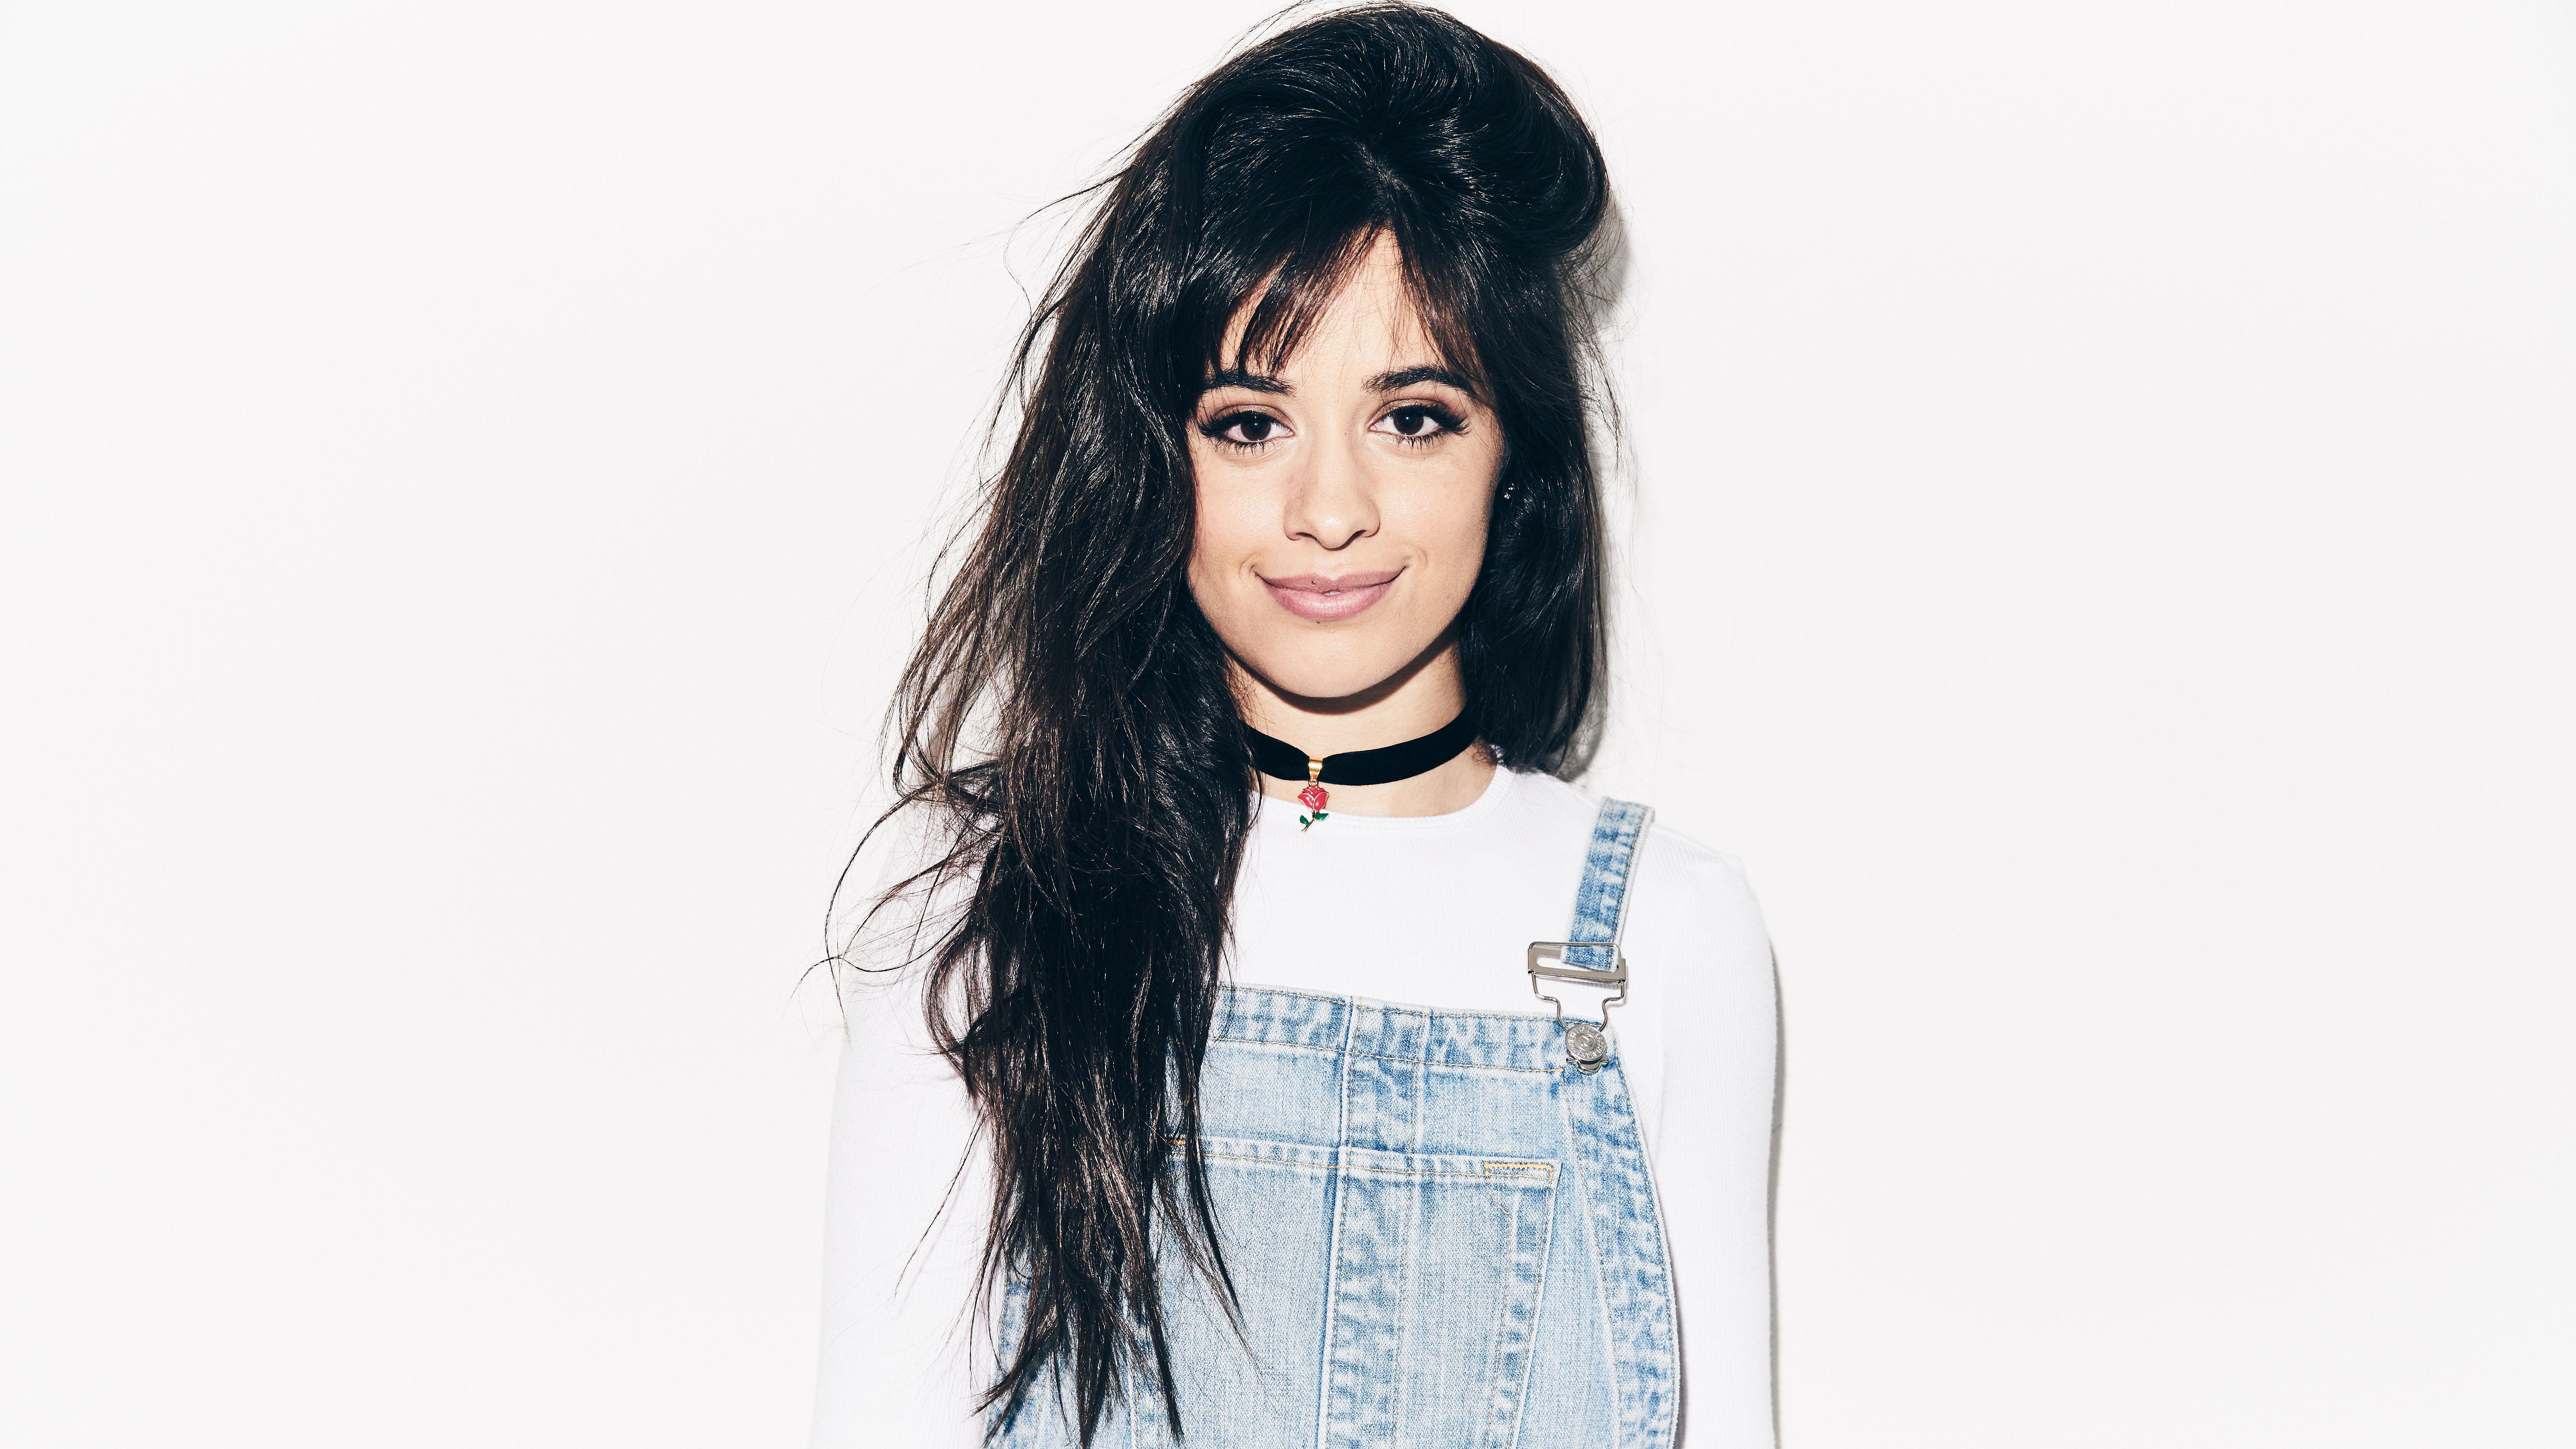 90 Camila Cabello  Android iPhone Desktop HD Backgrounds  Wallpapers  1080p 4k